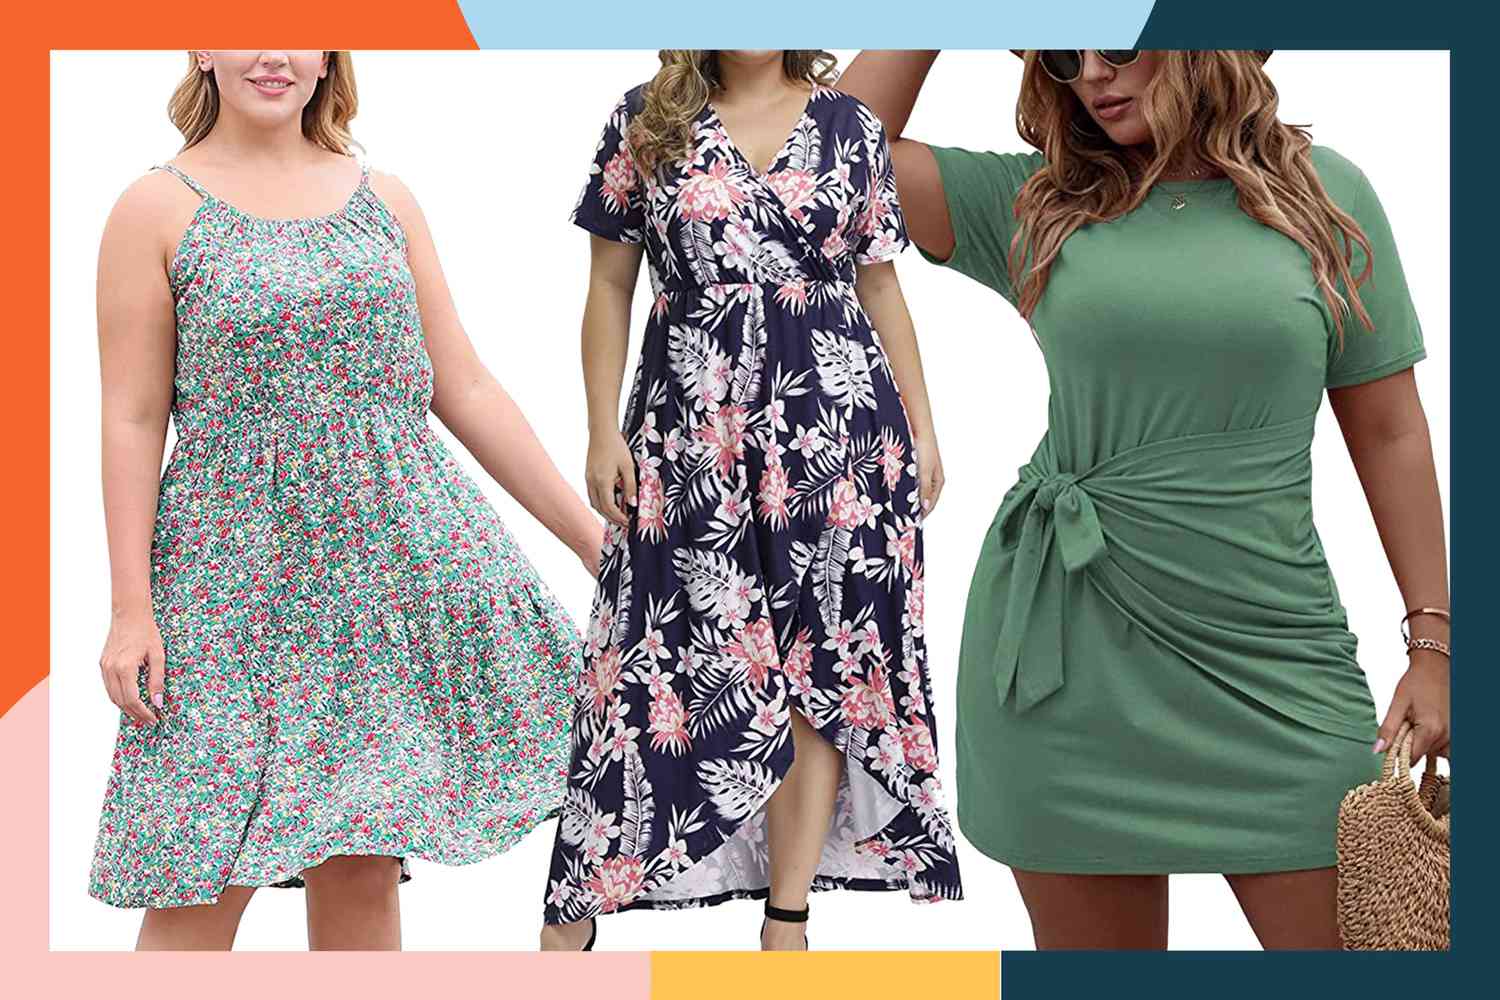 Summer Dresses Are Under $40 at Amazon ...